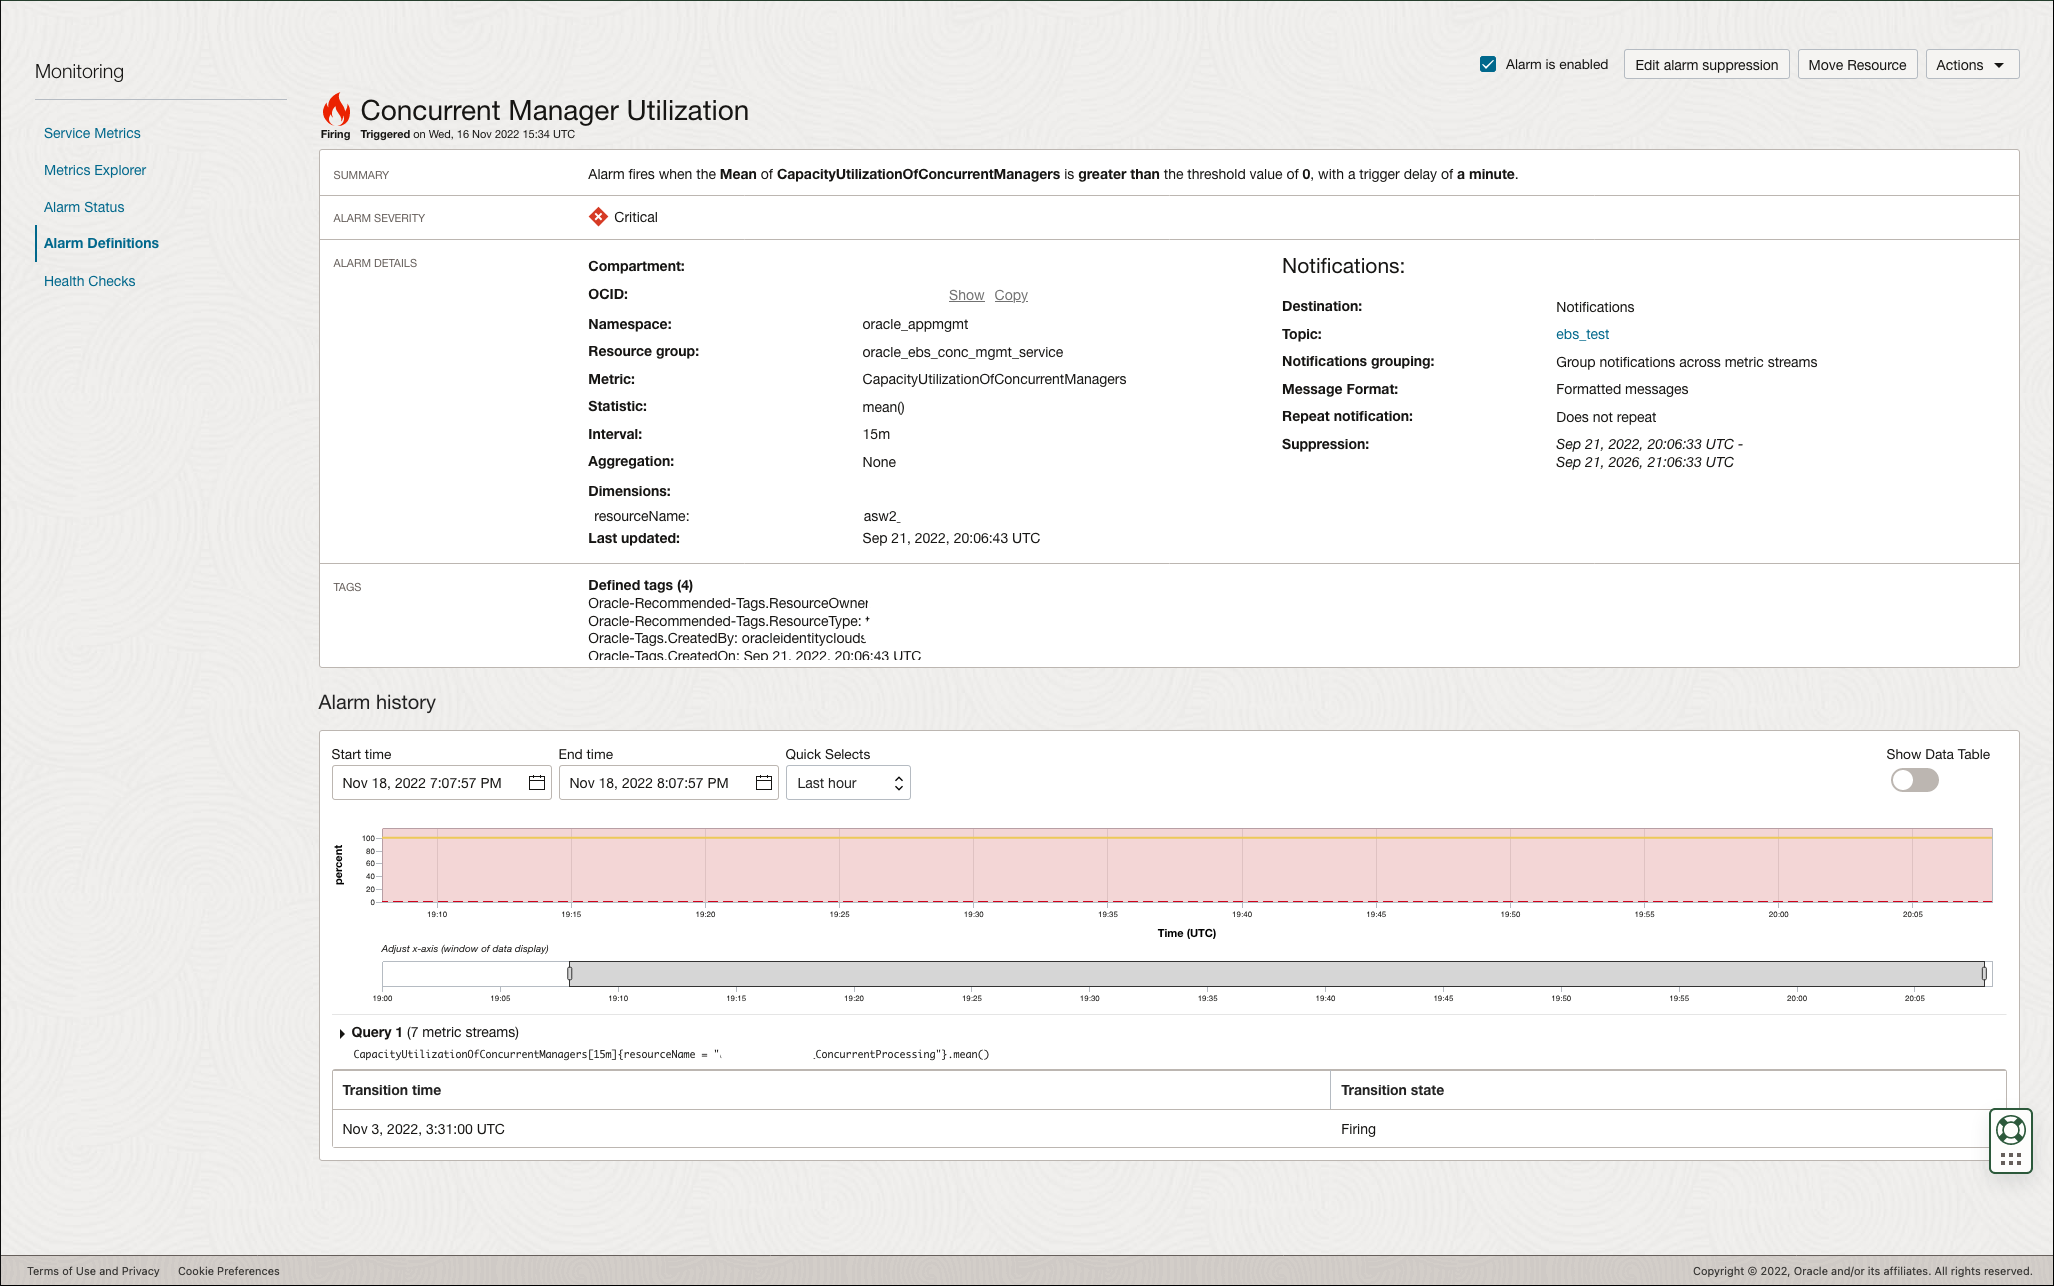 Image shows the OCI Monitoring page.